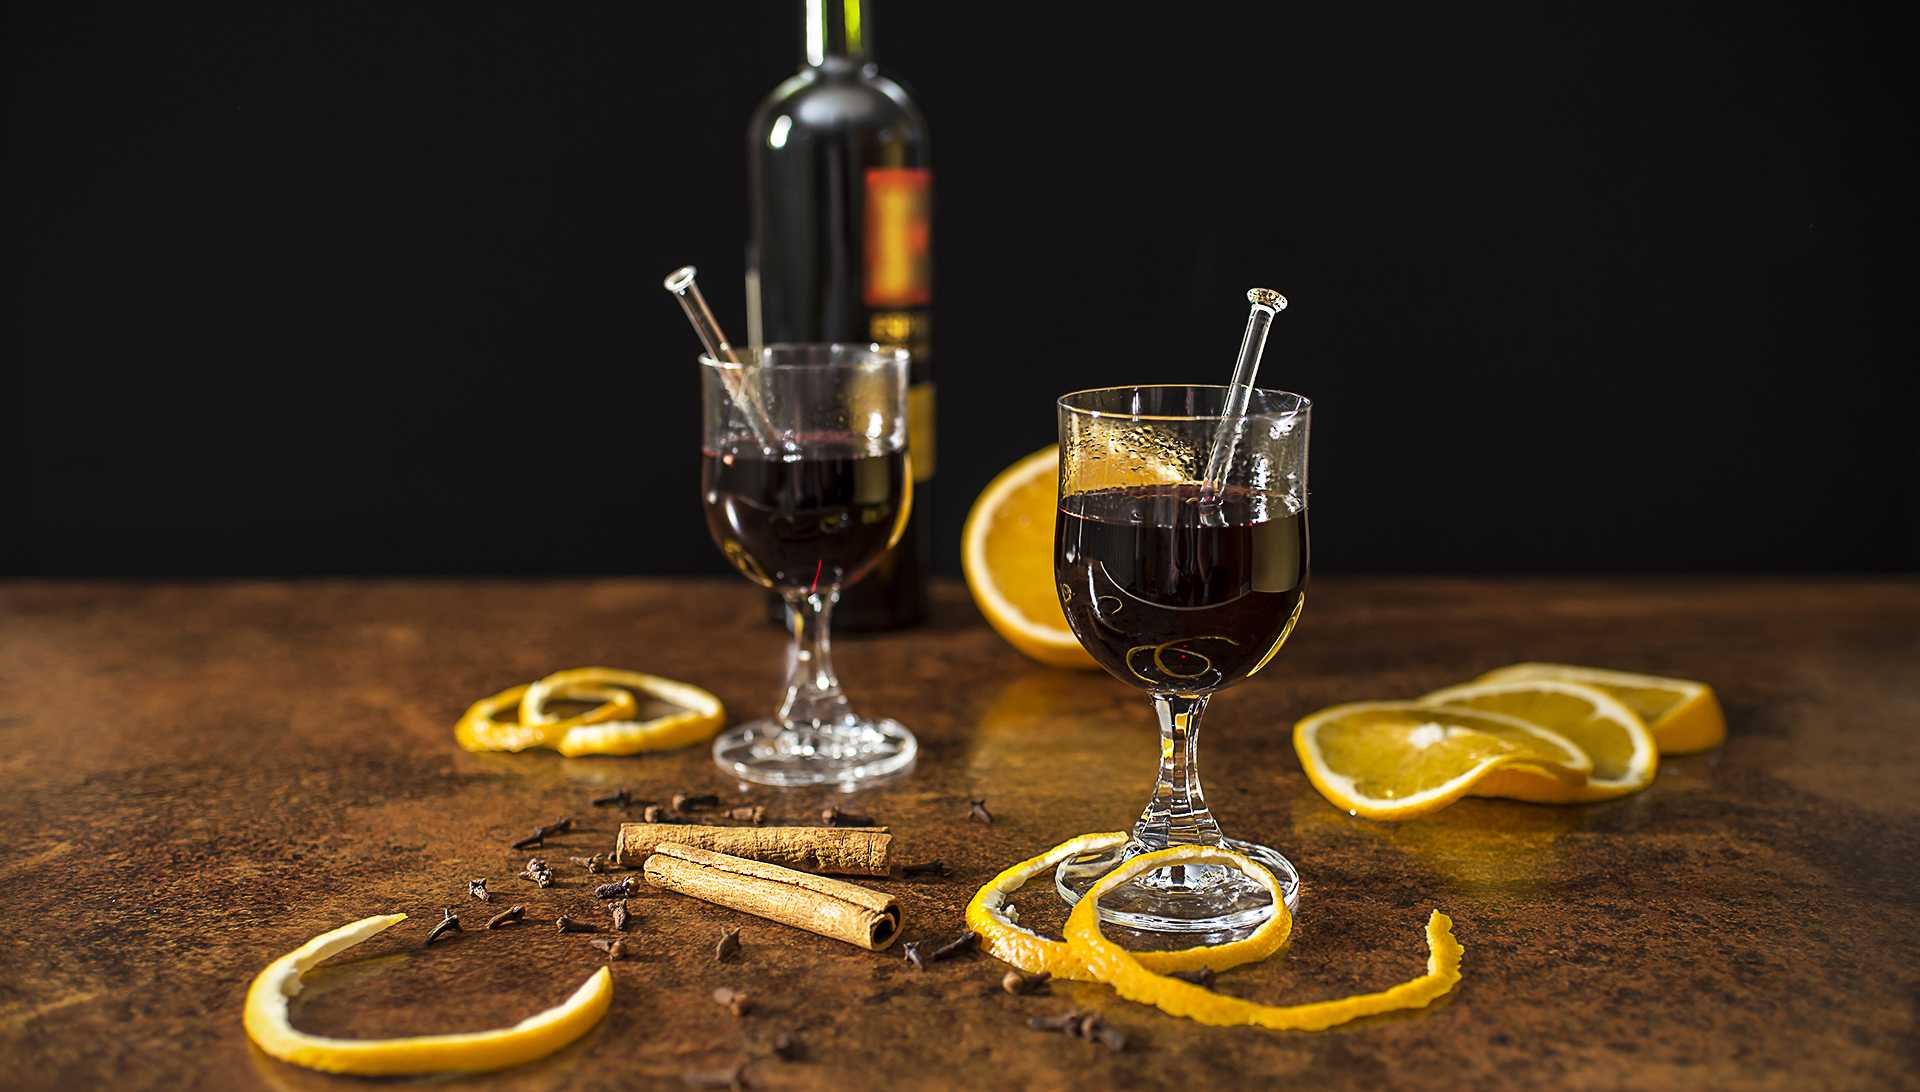 Mulled wine with spices and oranges close up in front of black background